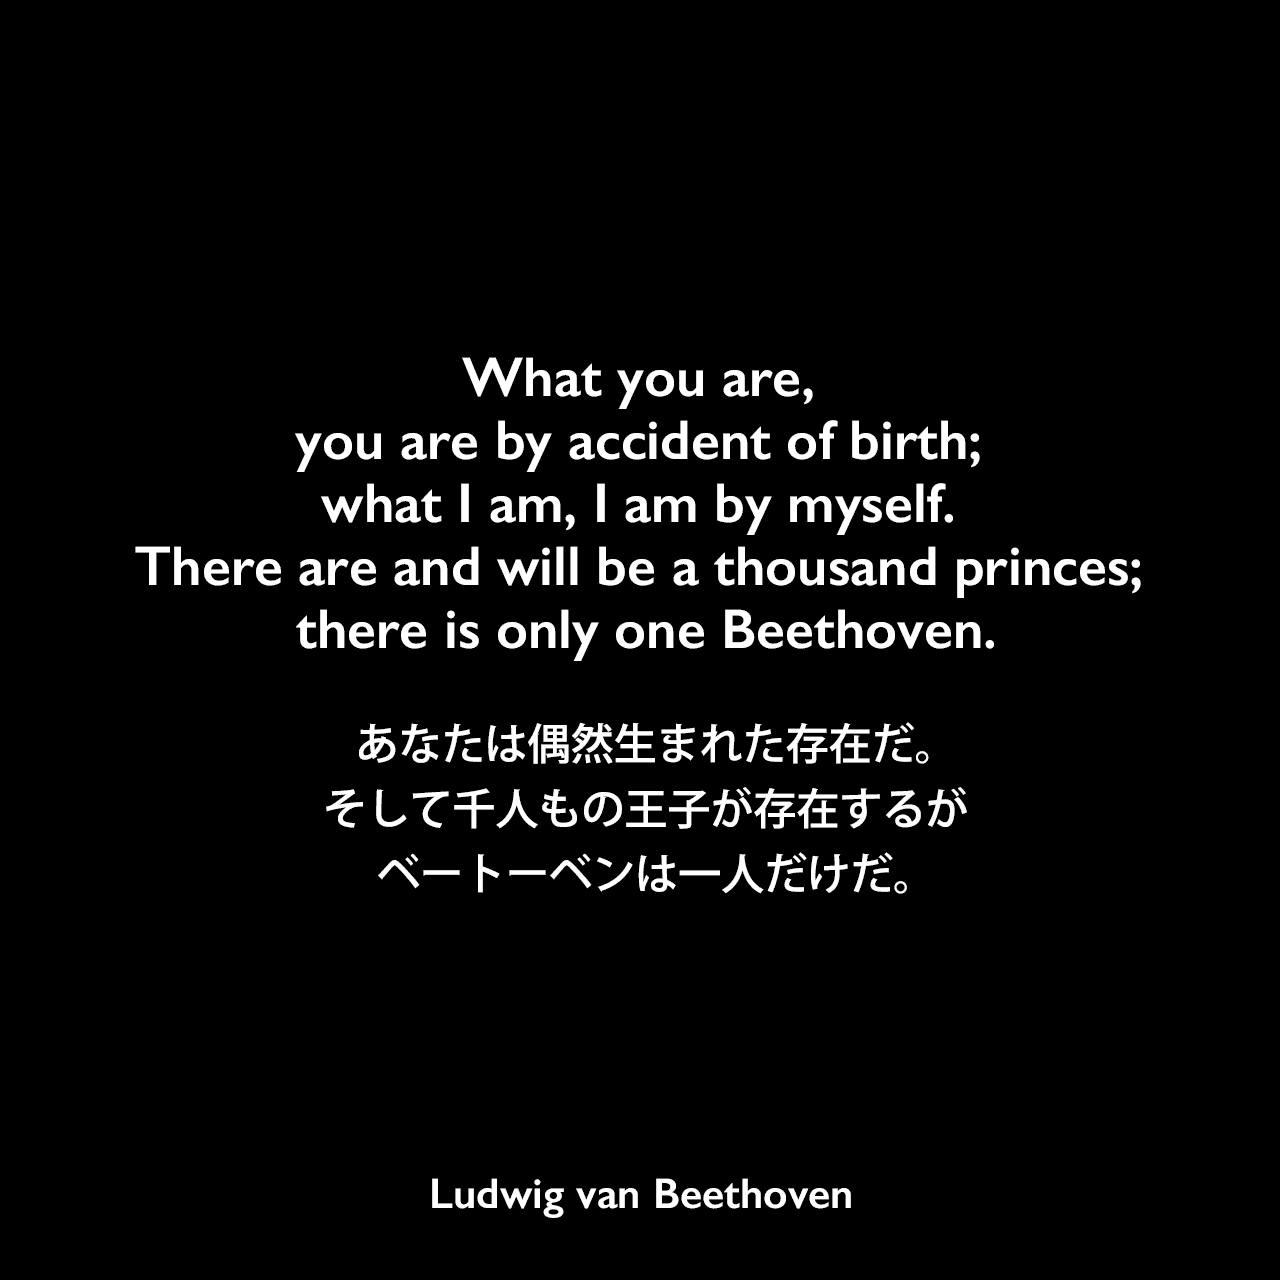 What you are, you are by accident of birth; what I am, I am by myself. There are and will be a thousand princes; there is only one Beethoven.あなたは偶然生まれた存在だ。そして千人もの王子が存在するが、ベートーベンは一人だけだ。Ludwig van Beethoven